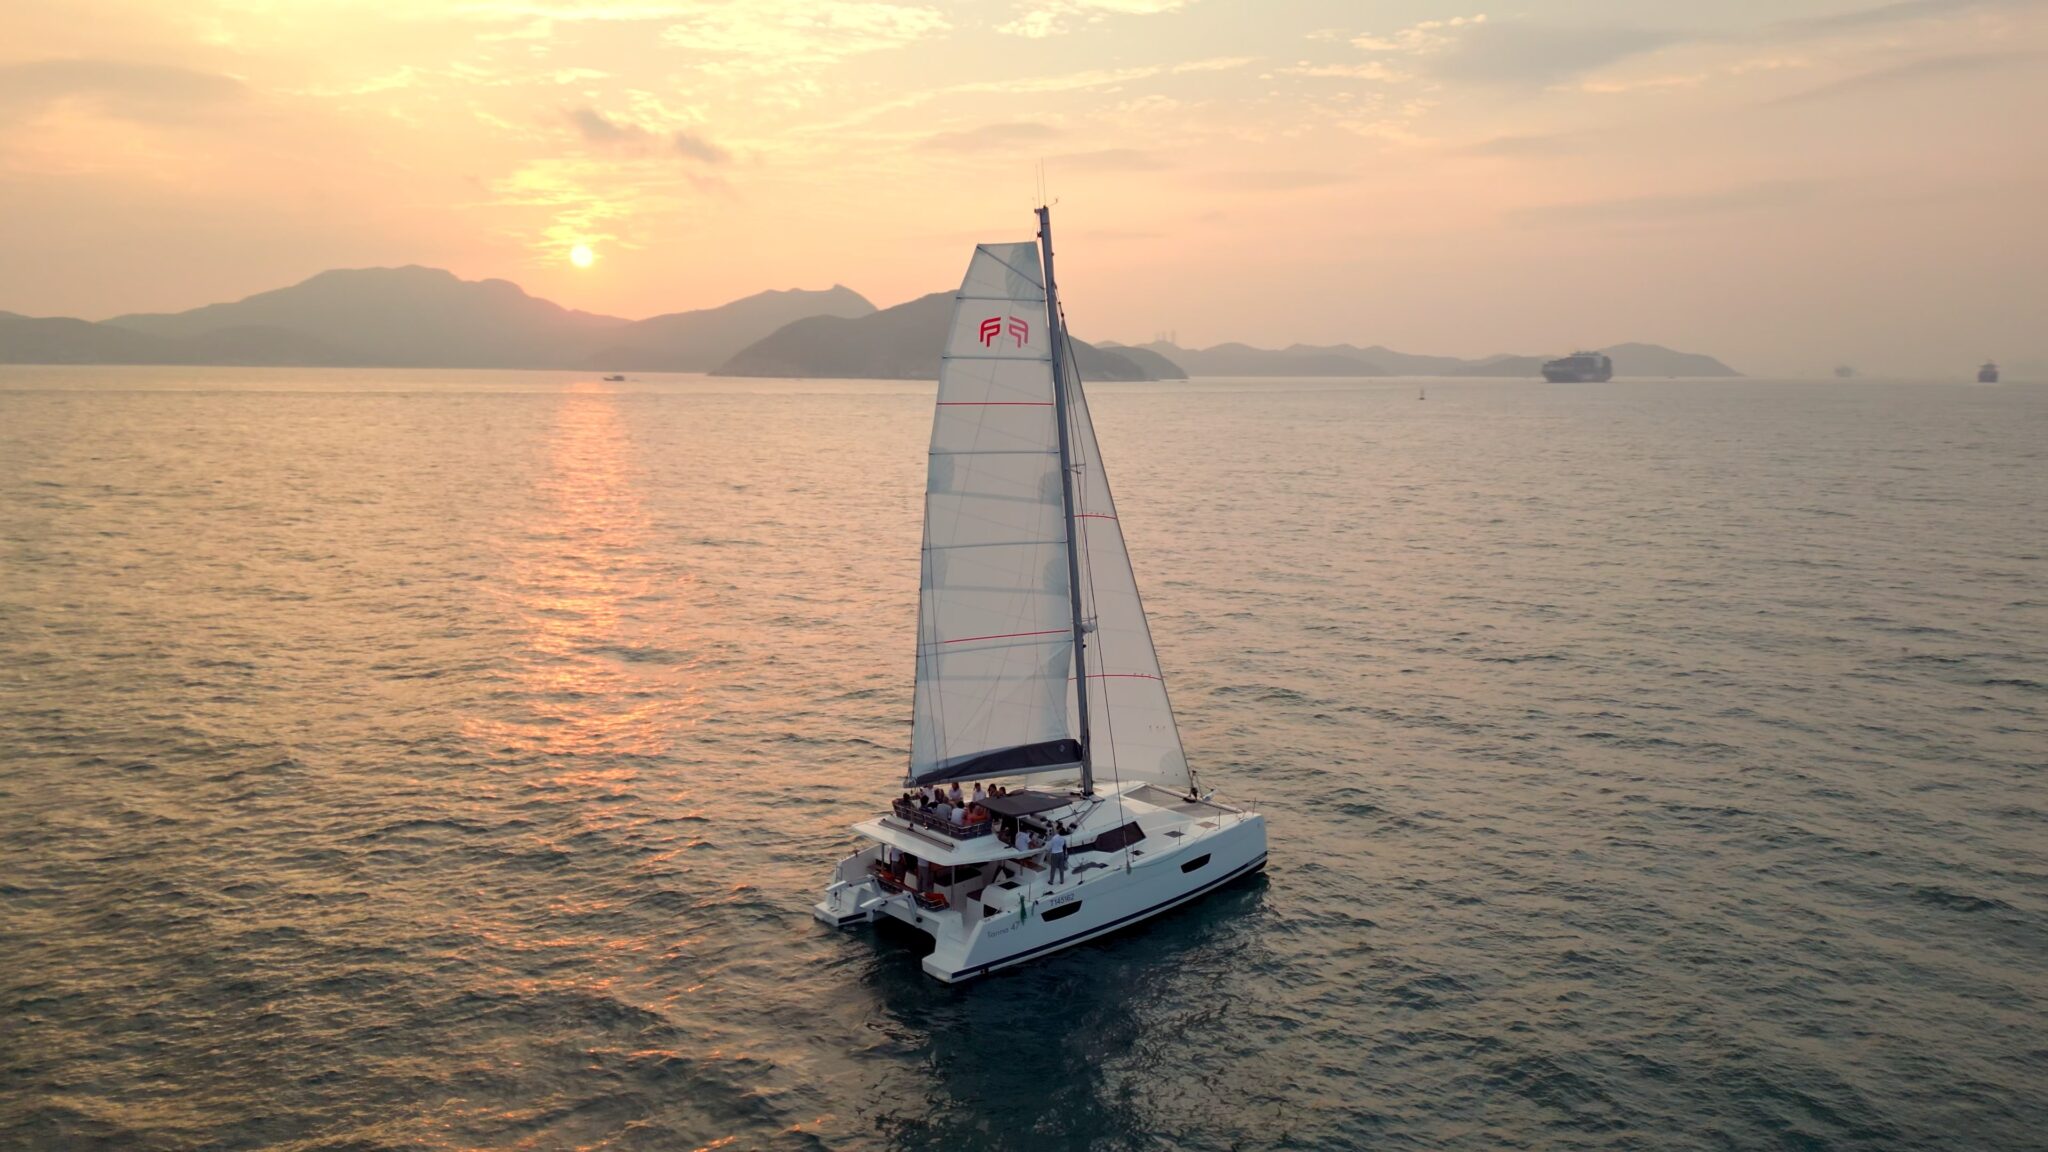 , Fountaine Pajot Tanna 47 Premiere in Hong Kong